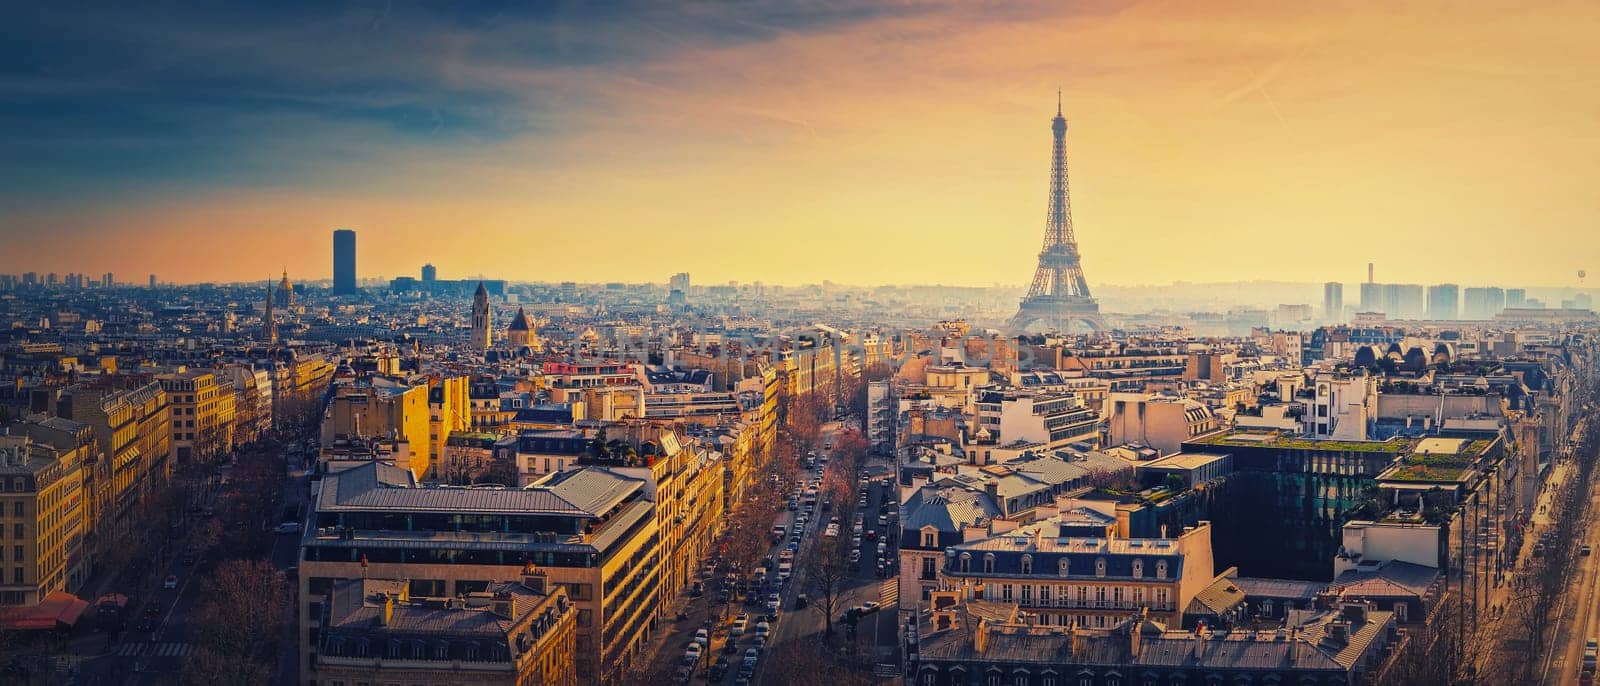 Sightseeing Paris panorama with view to the Eiffel Tower, France. Beautiful parisian cityscape sunset scene. Romantic view over rooftops of historic buildings and landmarks. Holiday destination by psychoshadow